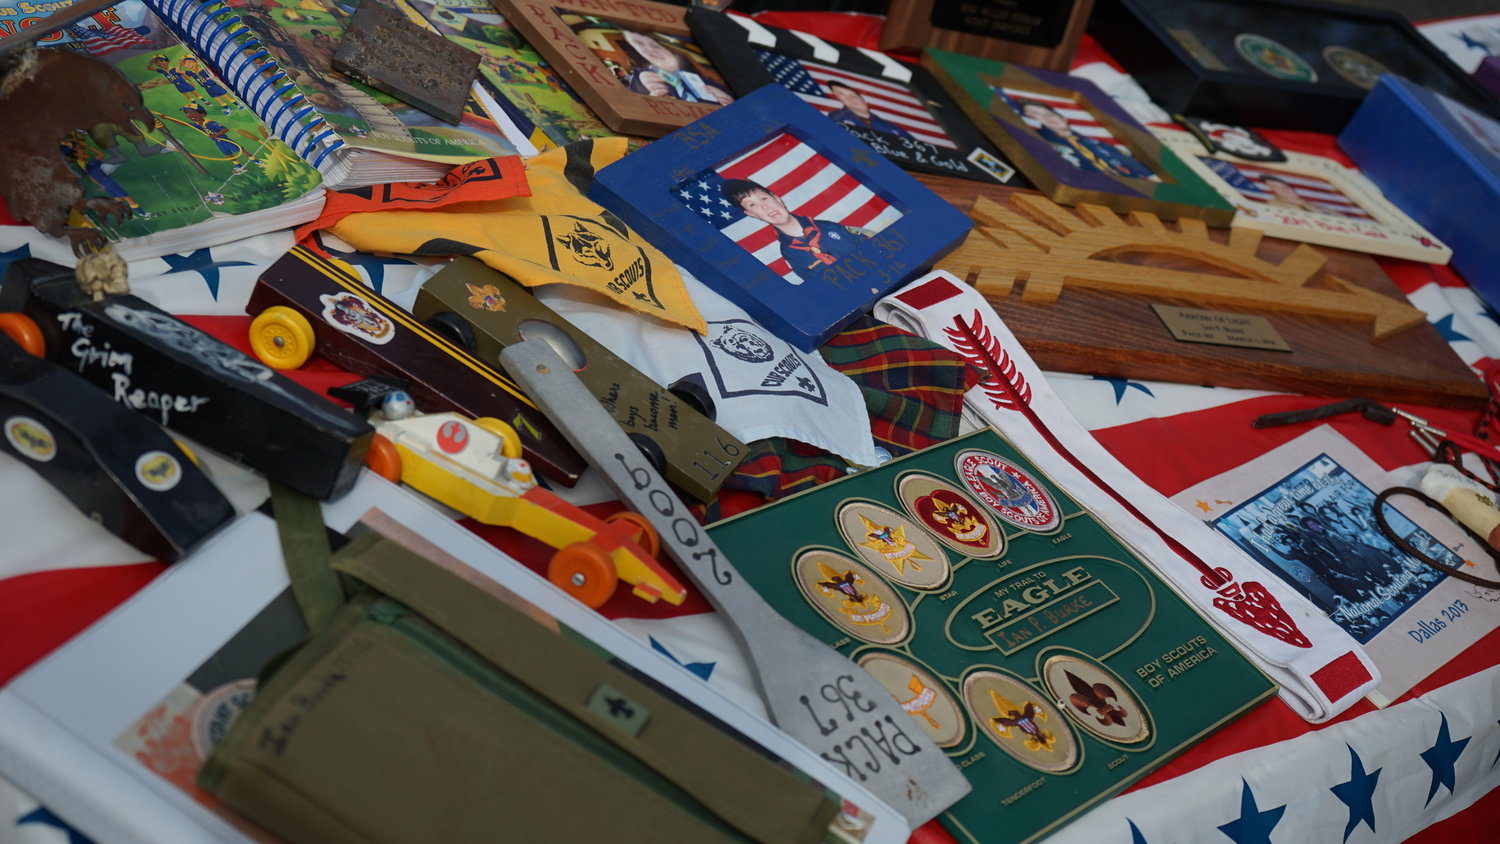 Each Eagle Scout gathered memorabilia from their time in the scouts.